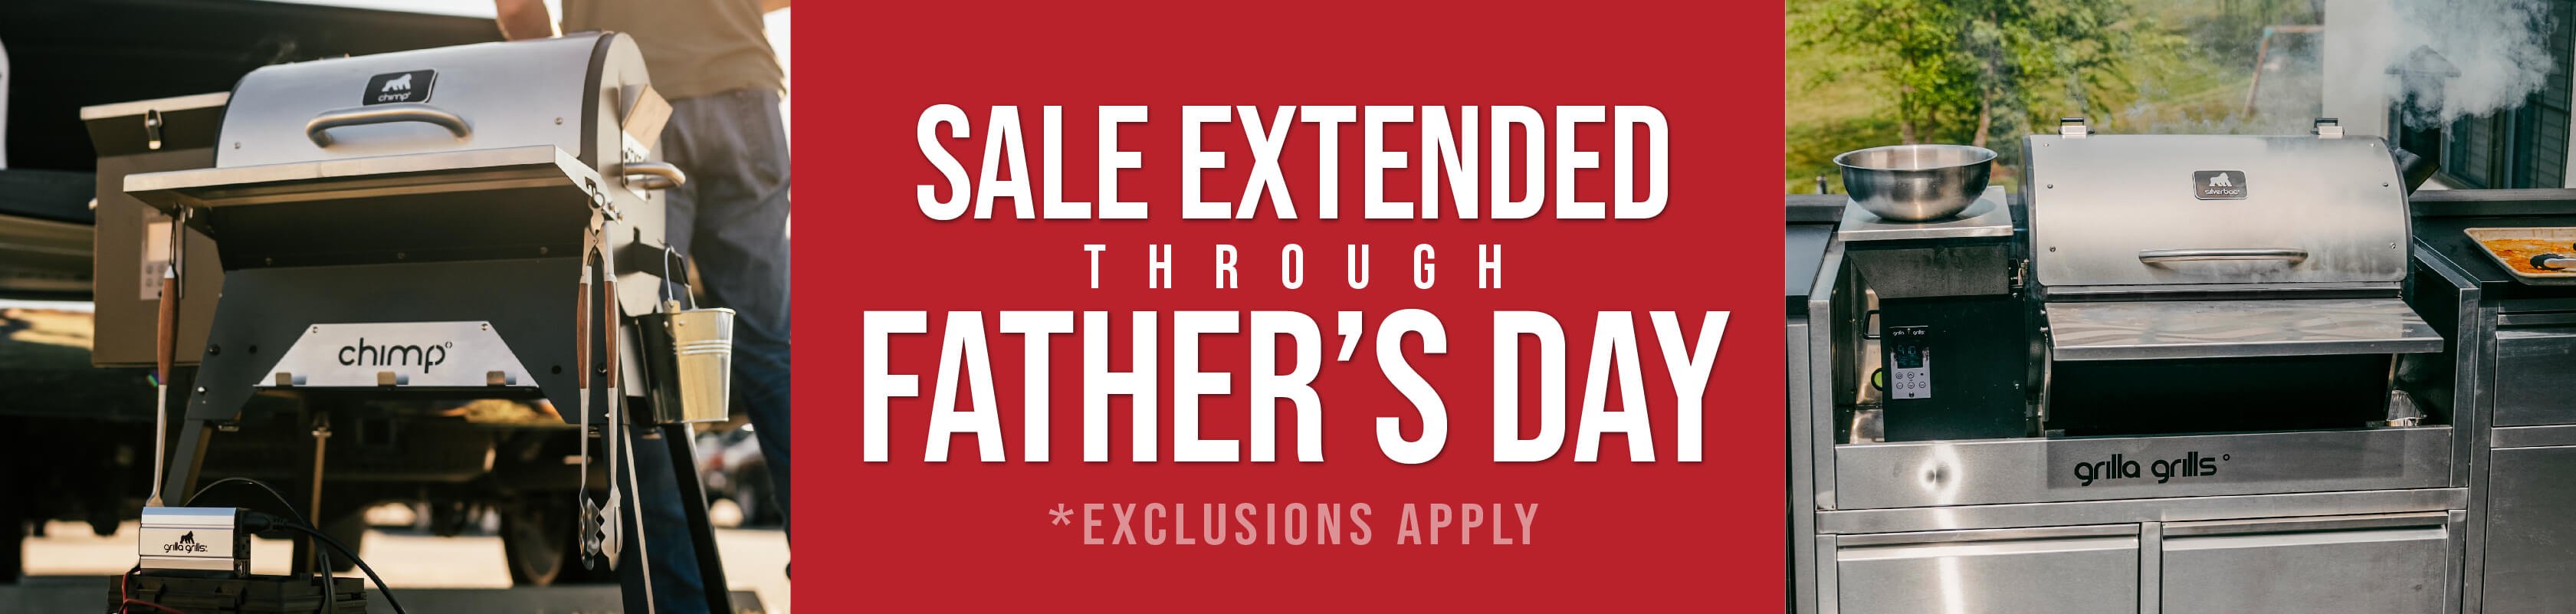 Sale Extended! 20% OFF - Sitewide! Shop  Now (offer not valid on pre-built kitchens)